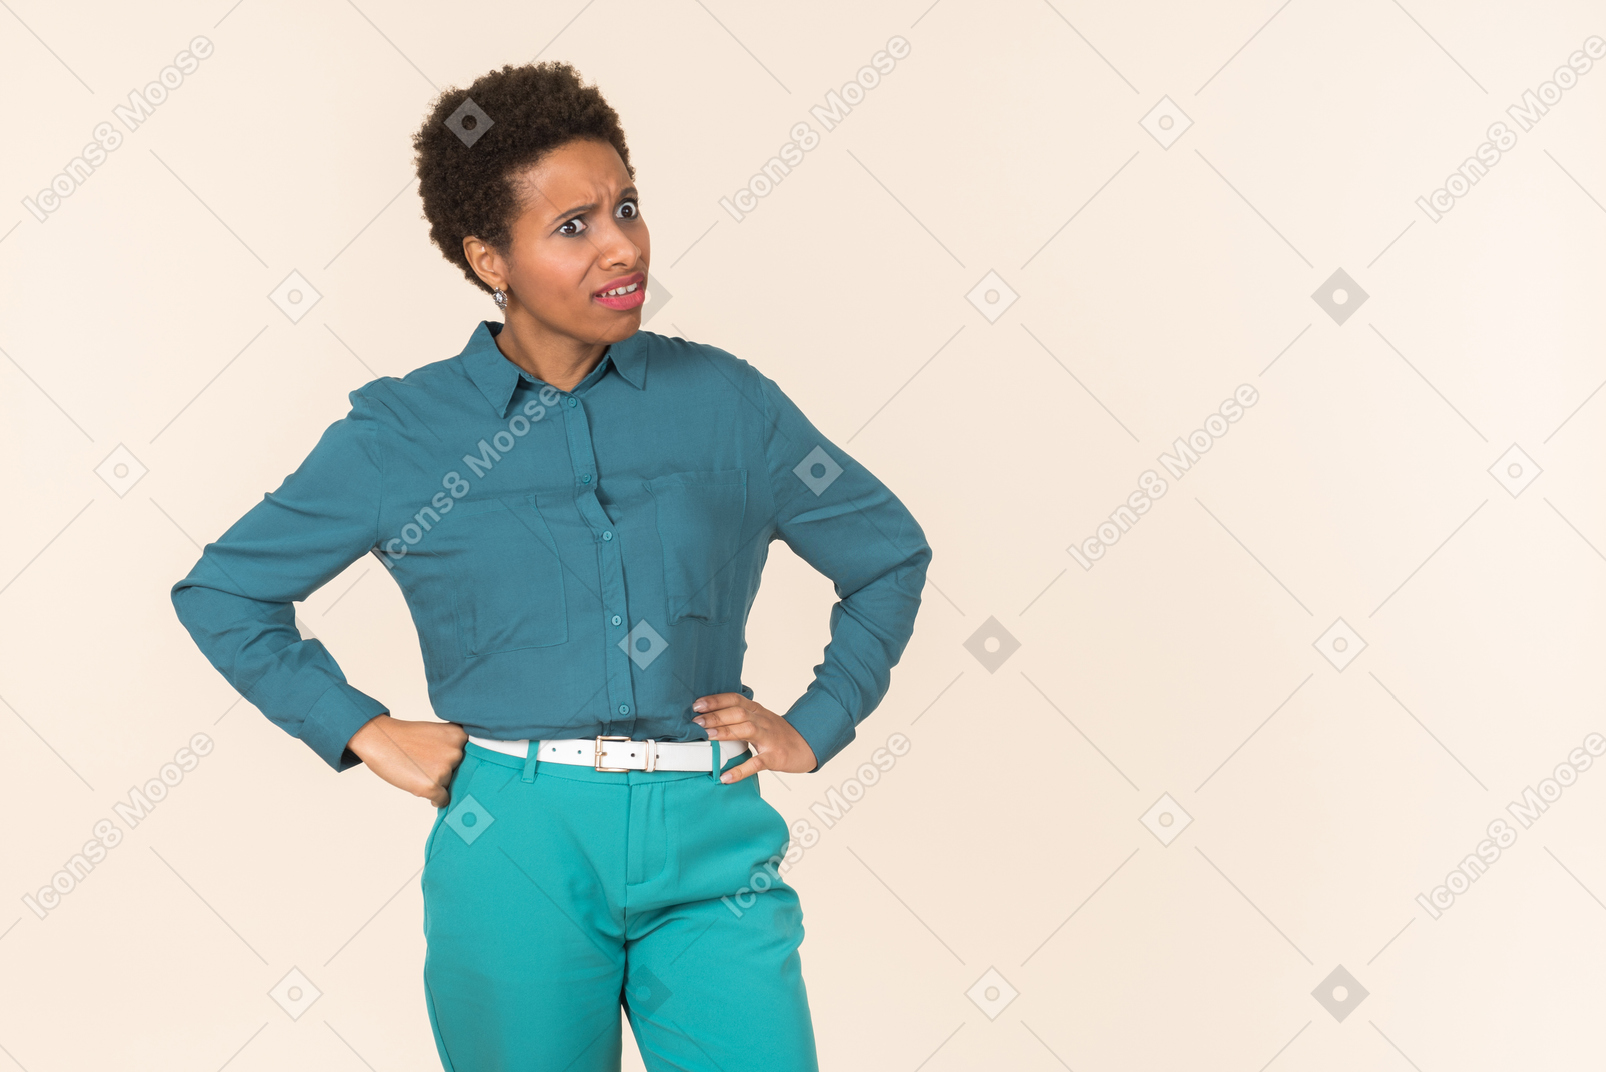 Black woman with a short haircut, wearing all blue, standing against a plain pastel background, looking emotional